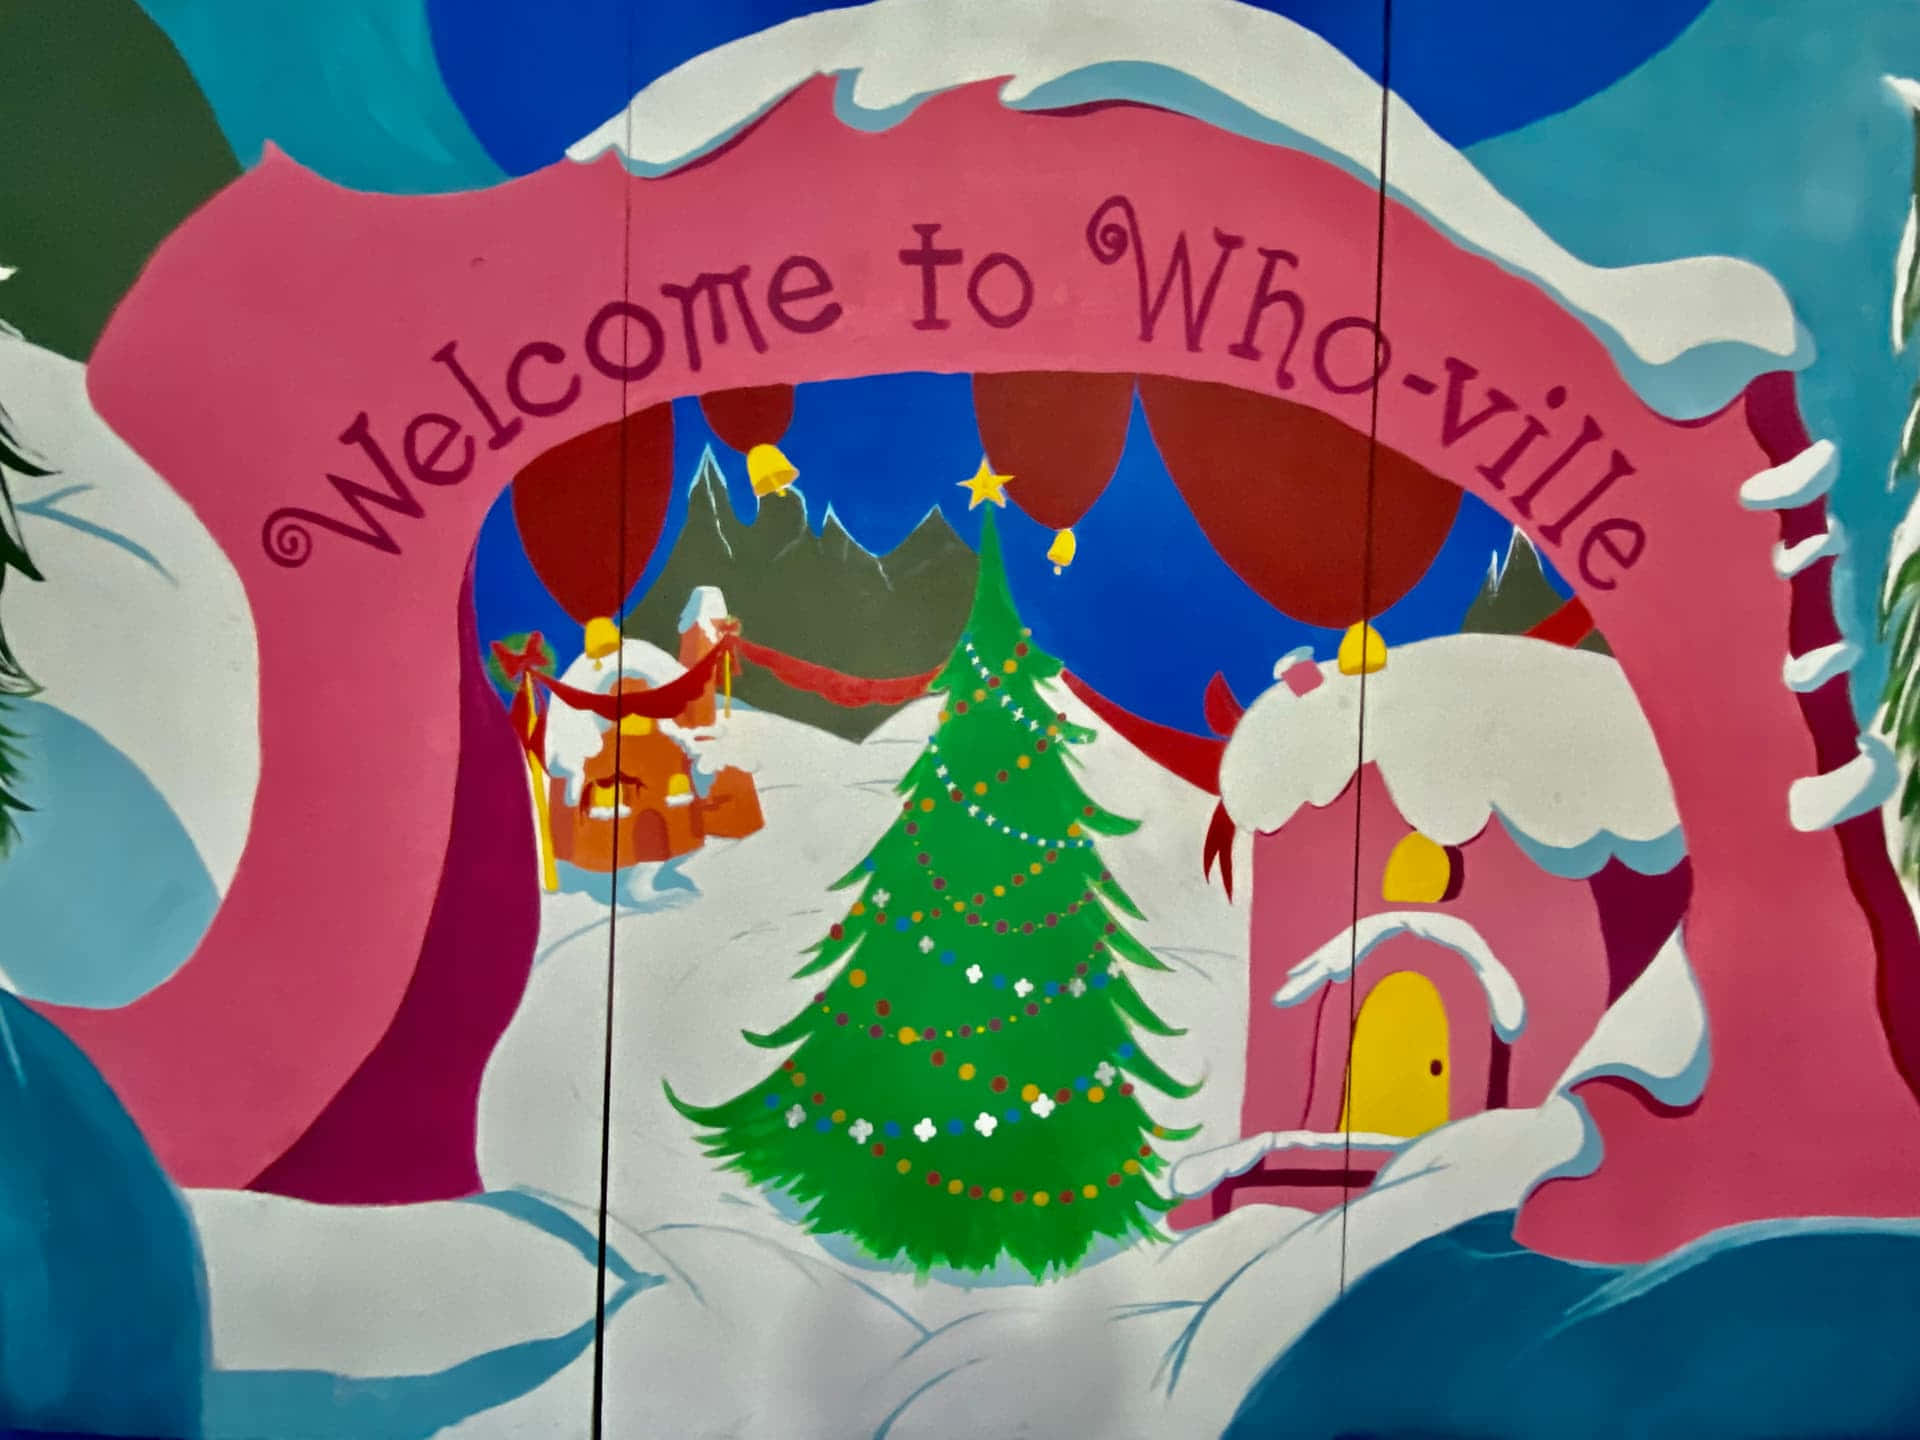 Welcome to Whoville, a colorful and happy town